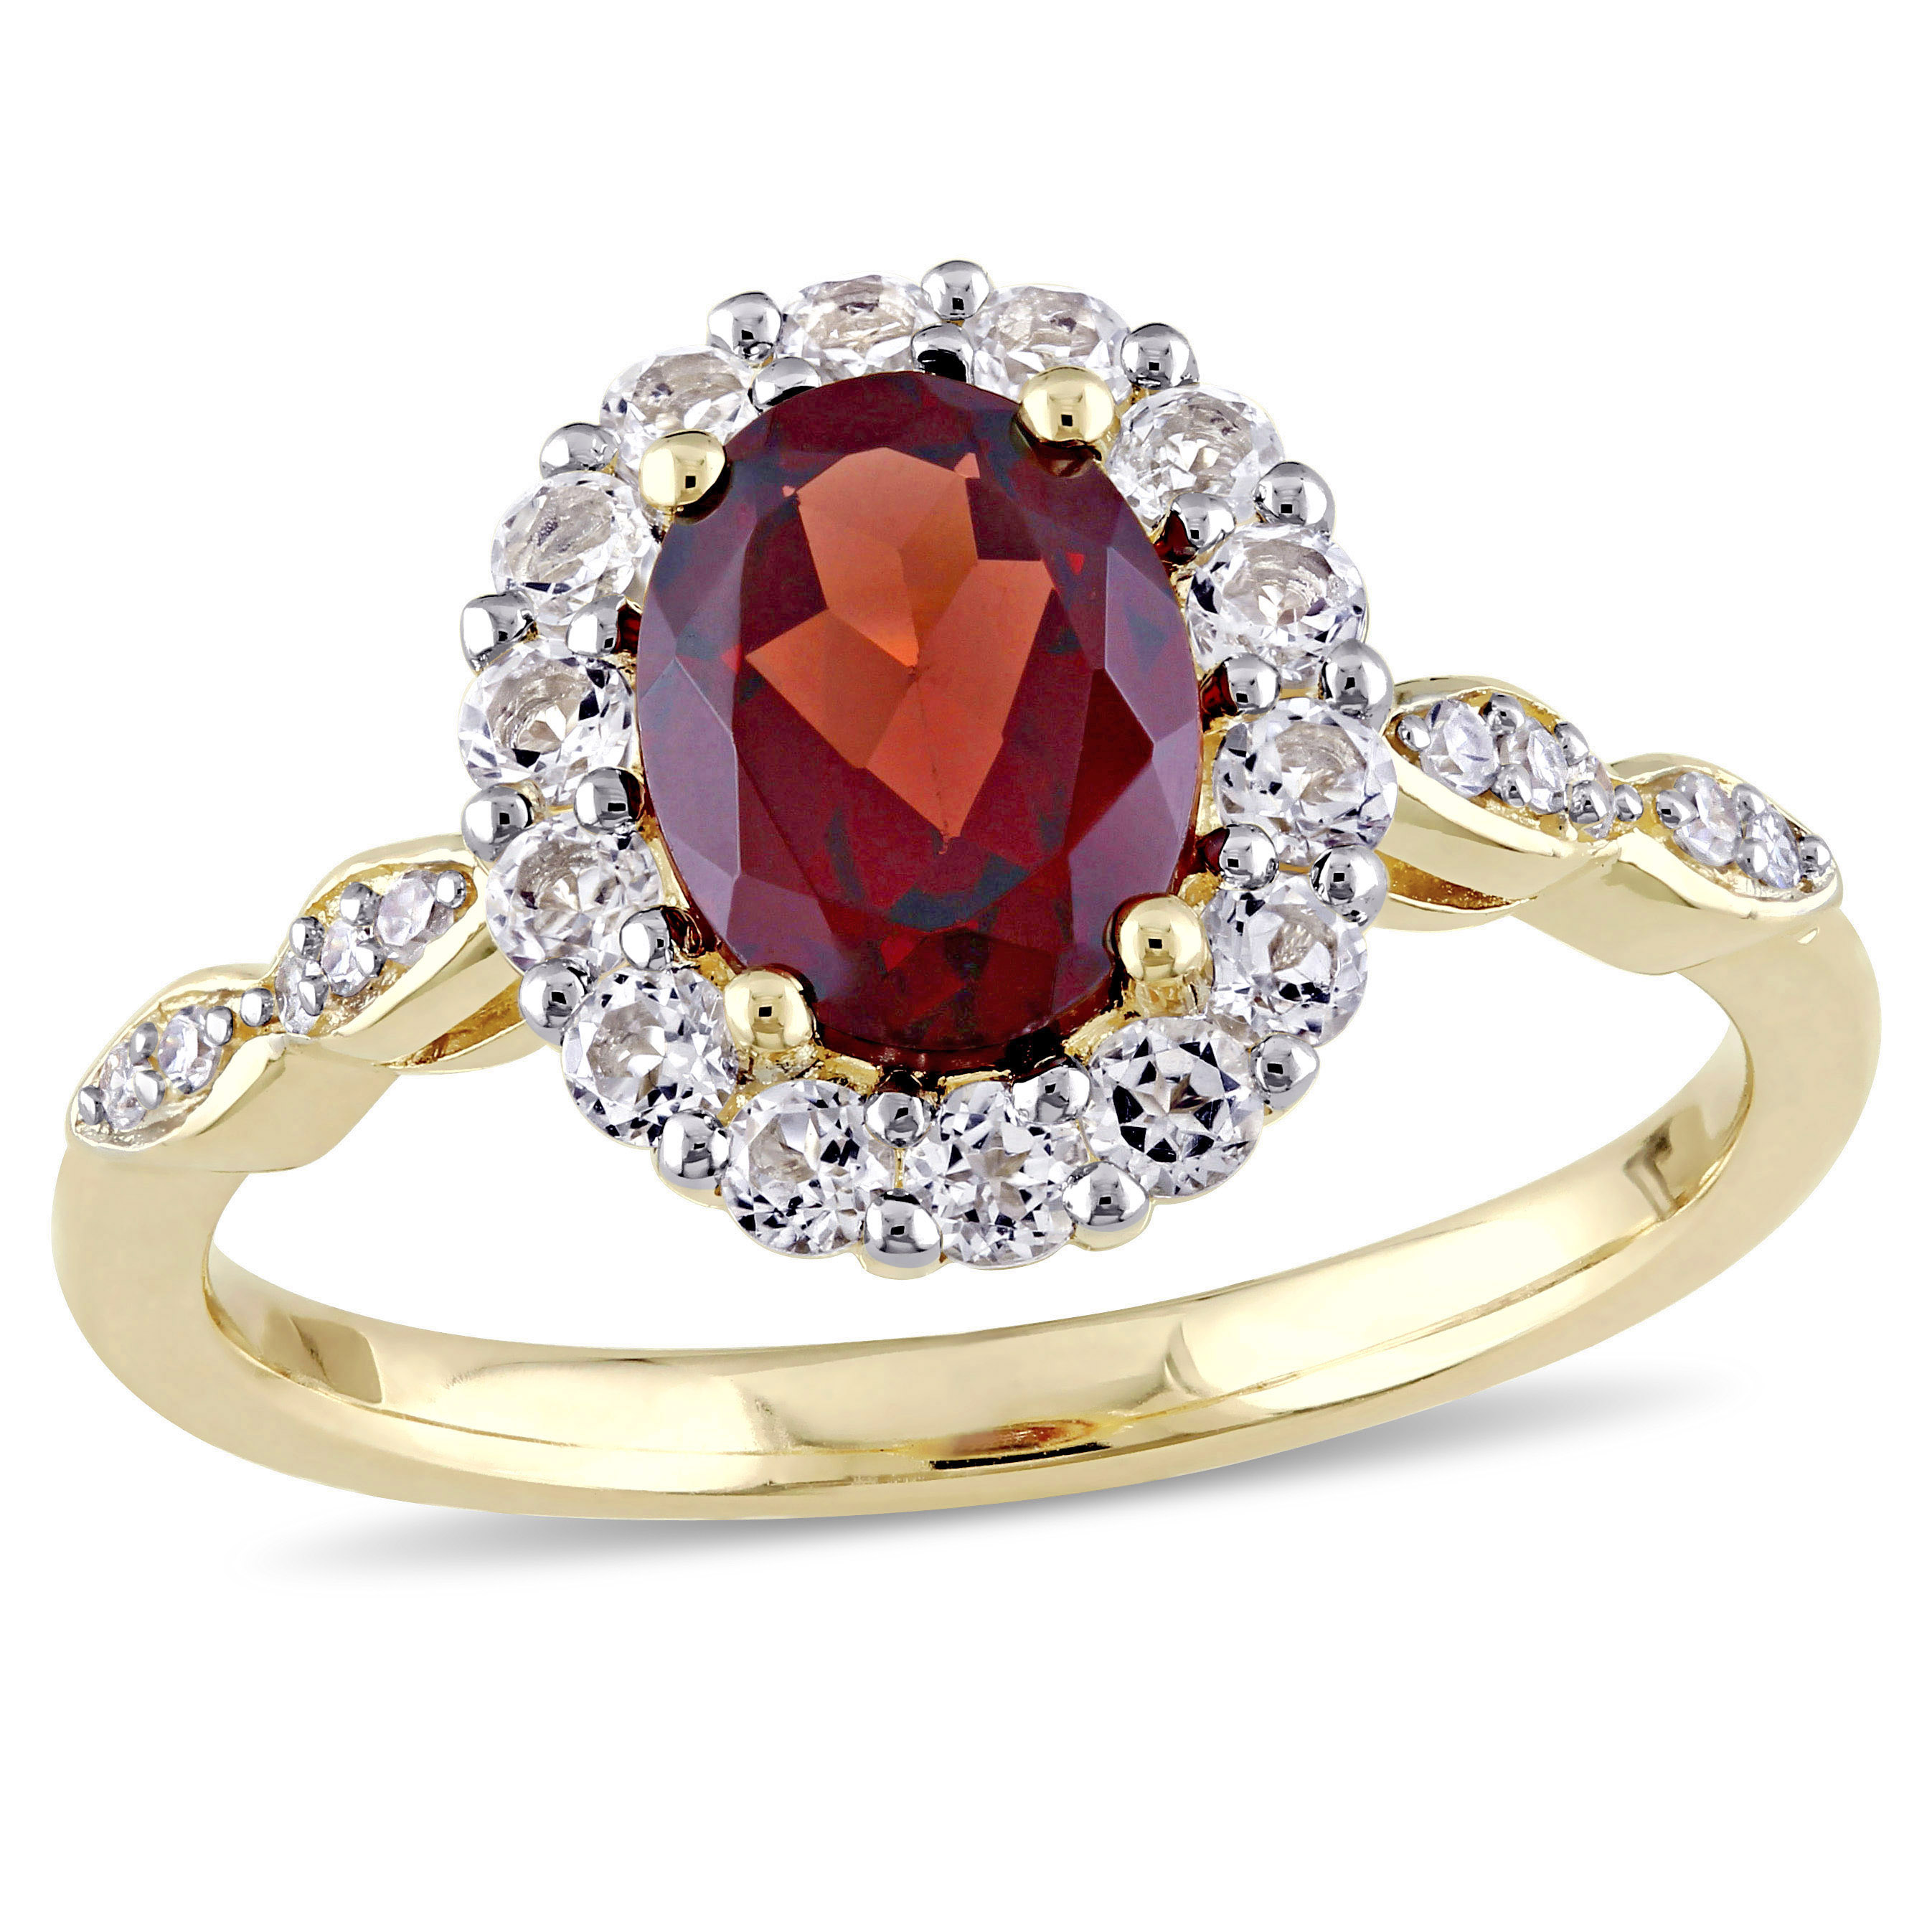 Oval Shape Garnet, White Topaz, and Diamond Accent Vintage Ring in 14k Yellow Gold